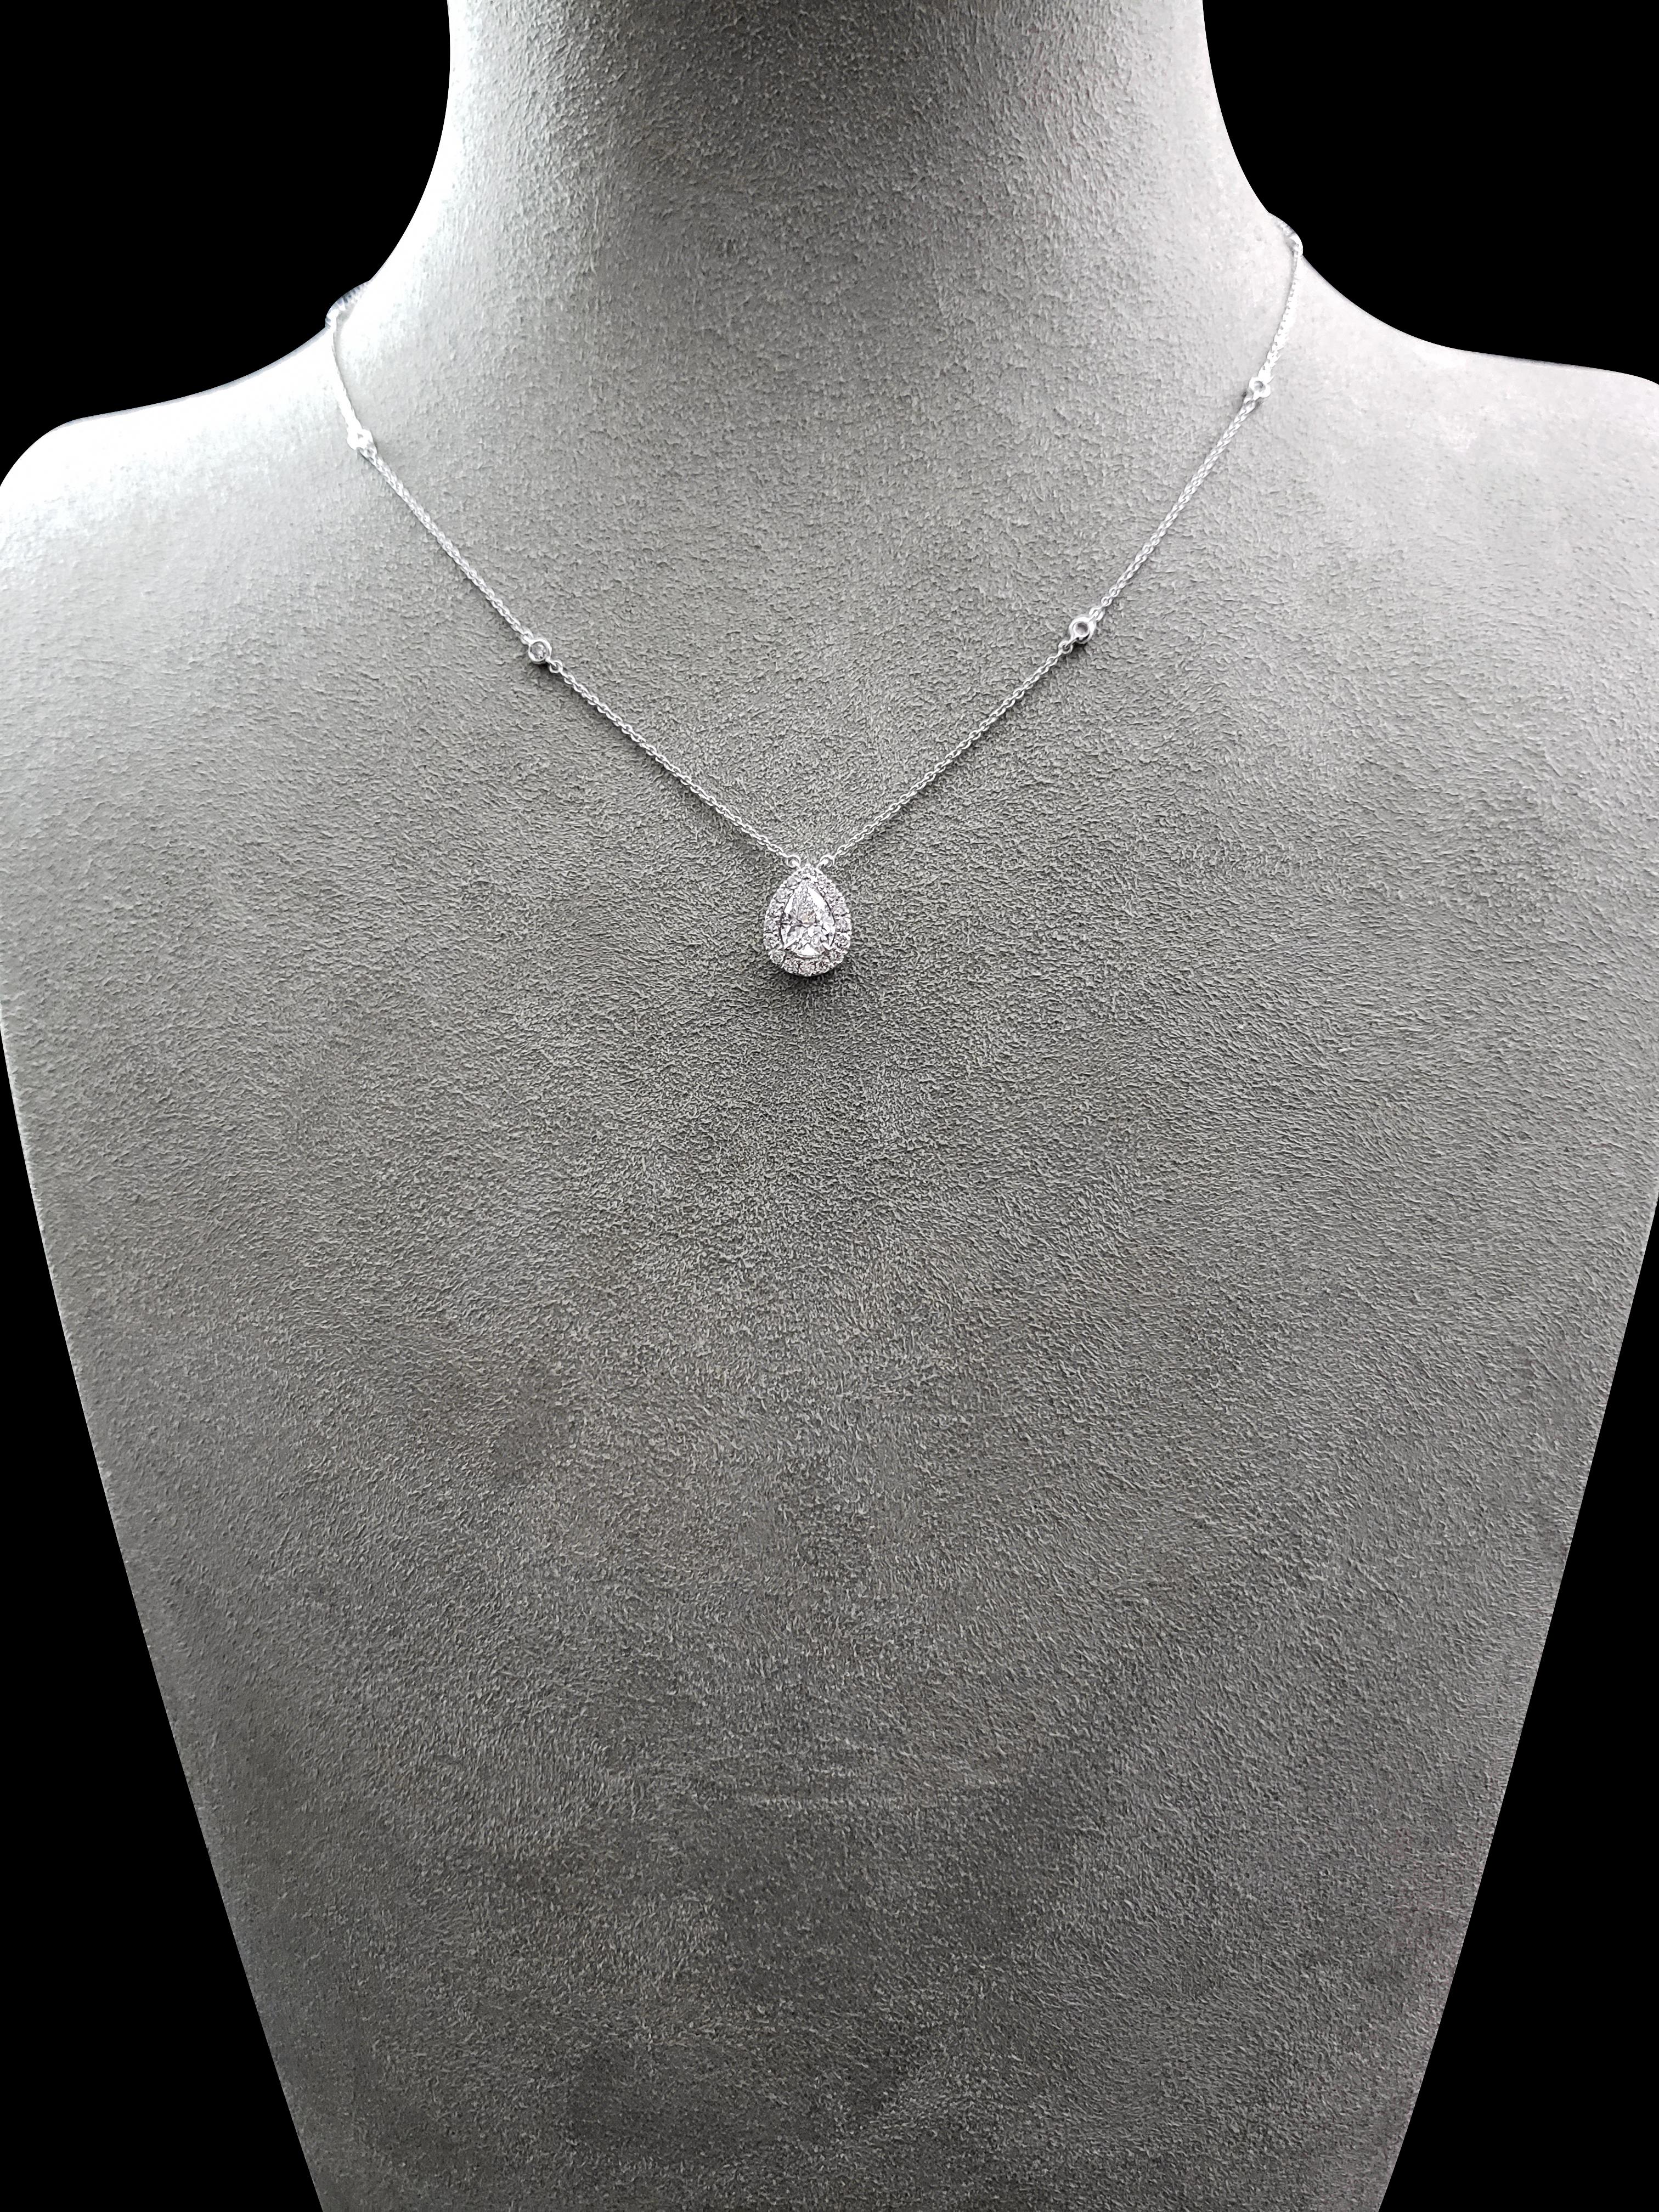 A luxurious and brilliant pendant necklace set with a gorgeous 0.72 carat pear shape diamond. The center diamond is surrounded by a halo of round brilliant diamonds set in an 18 karat white gold composition. Attached to an adjustable 16-18 inch